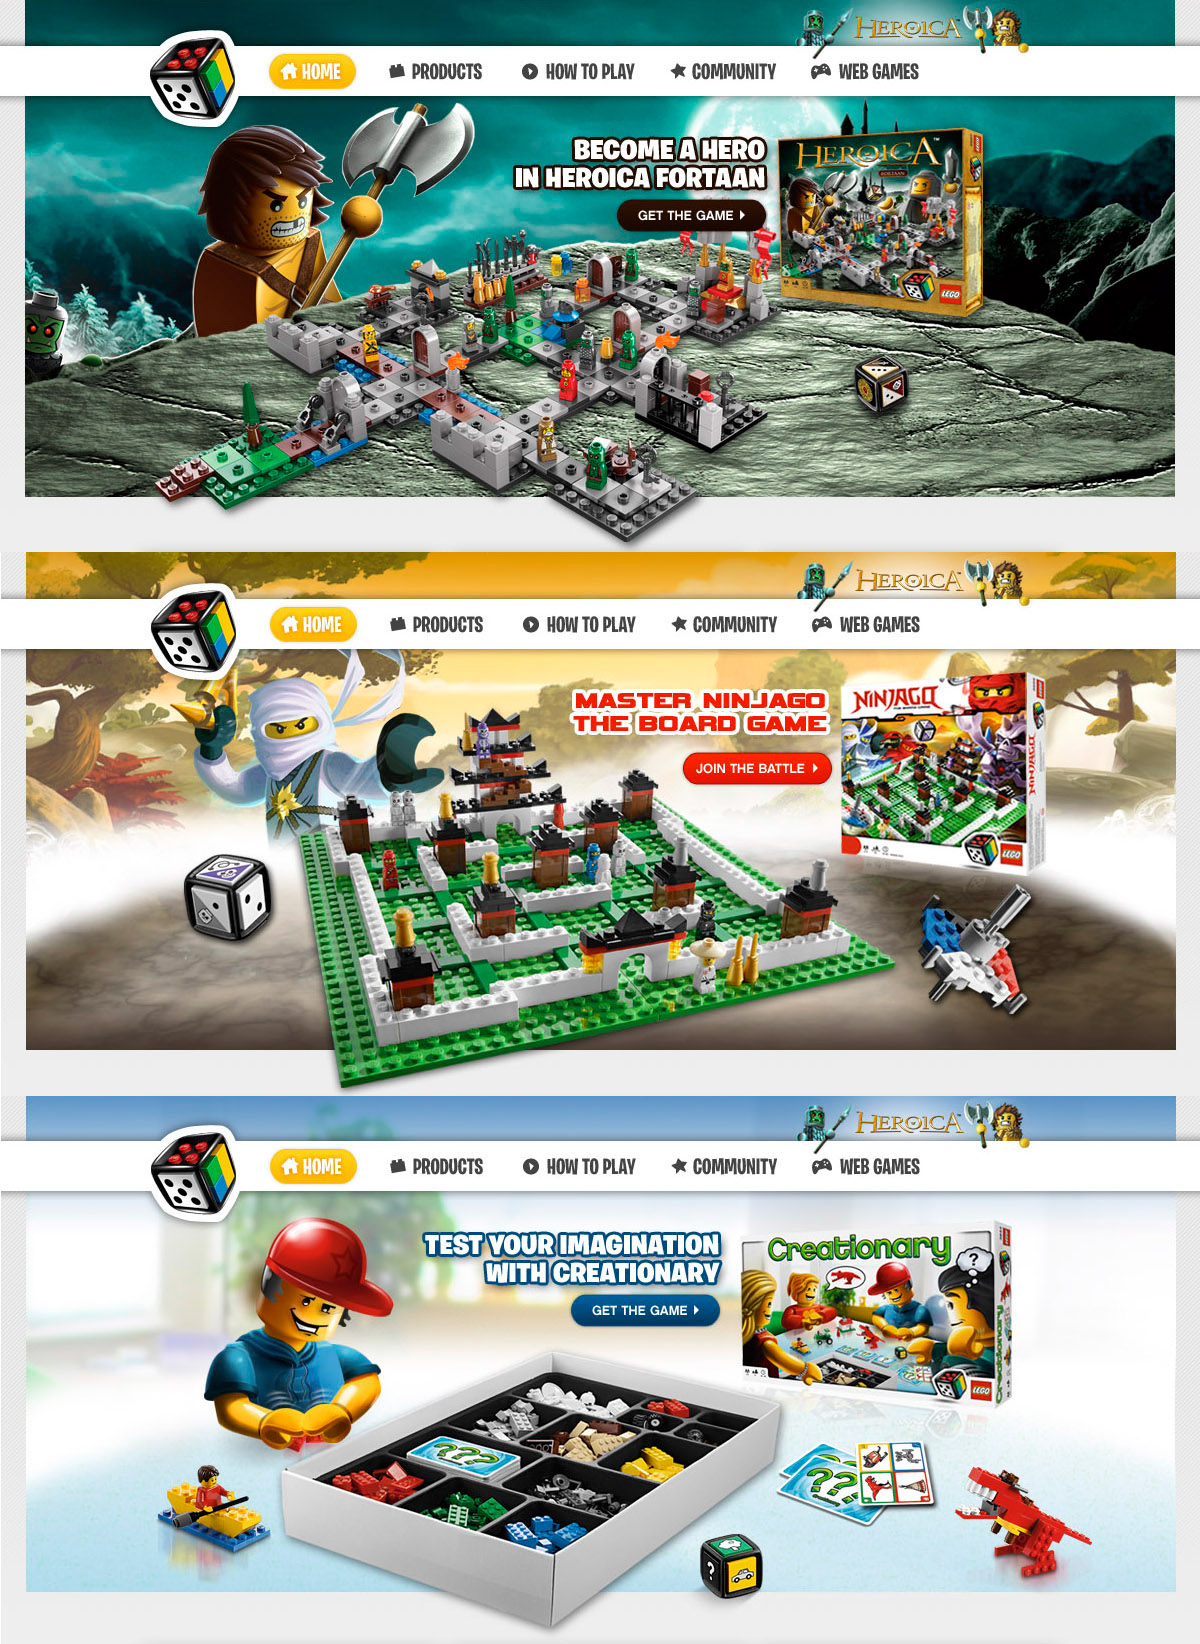 LEGO toys products Games LGS